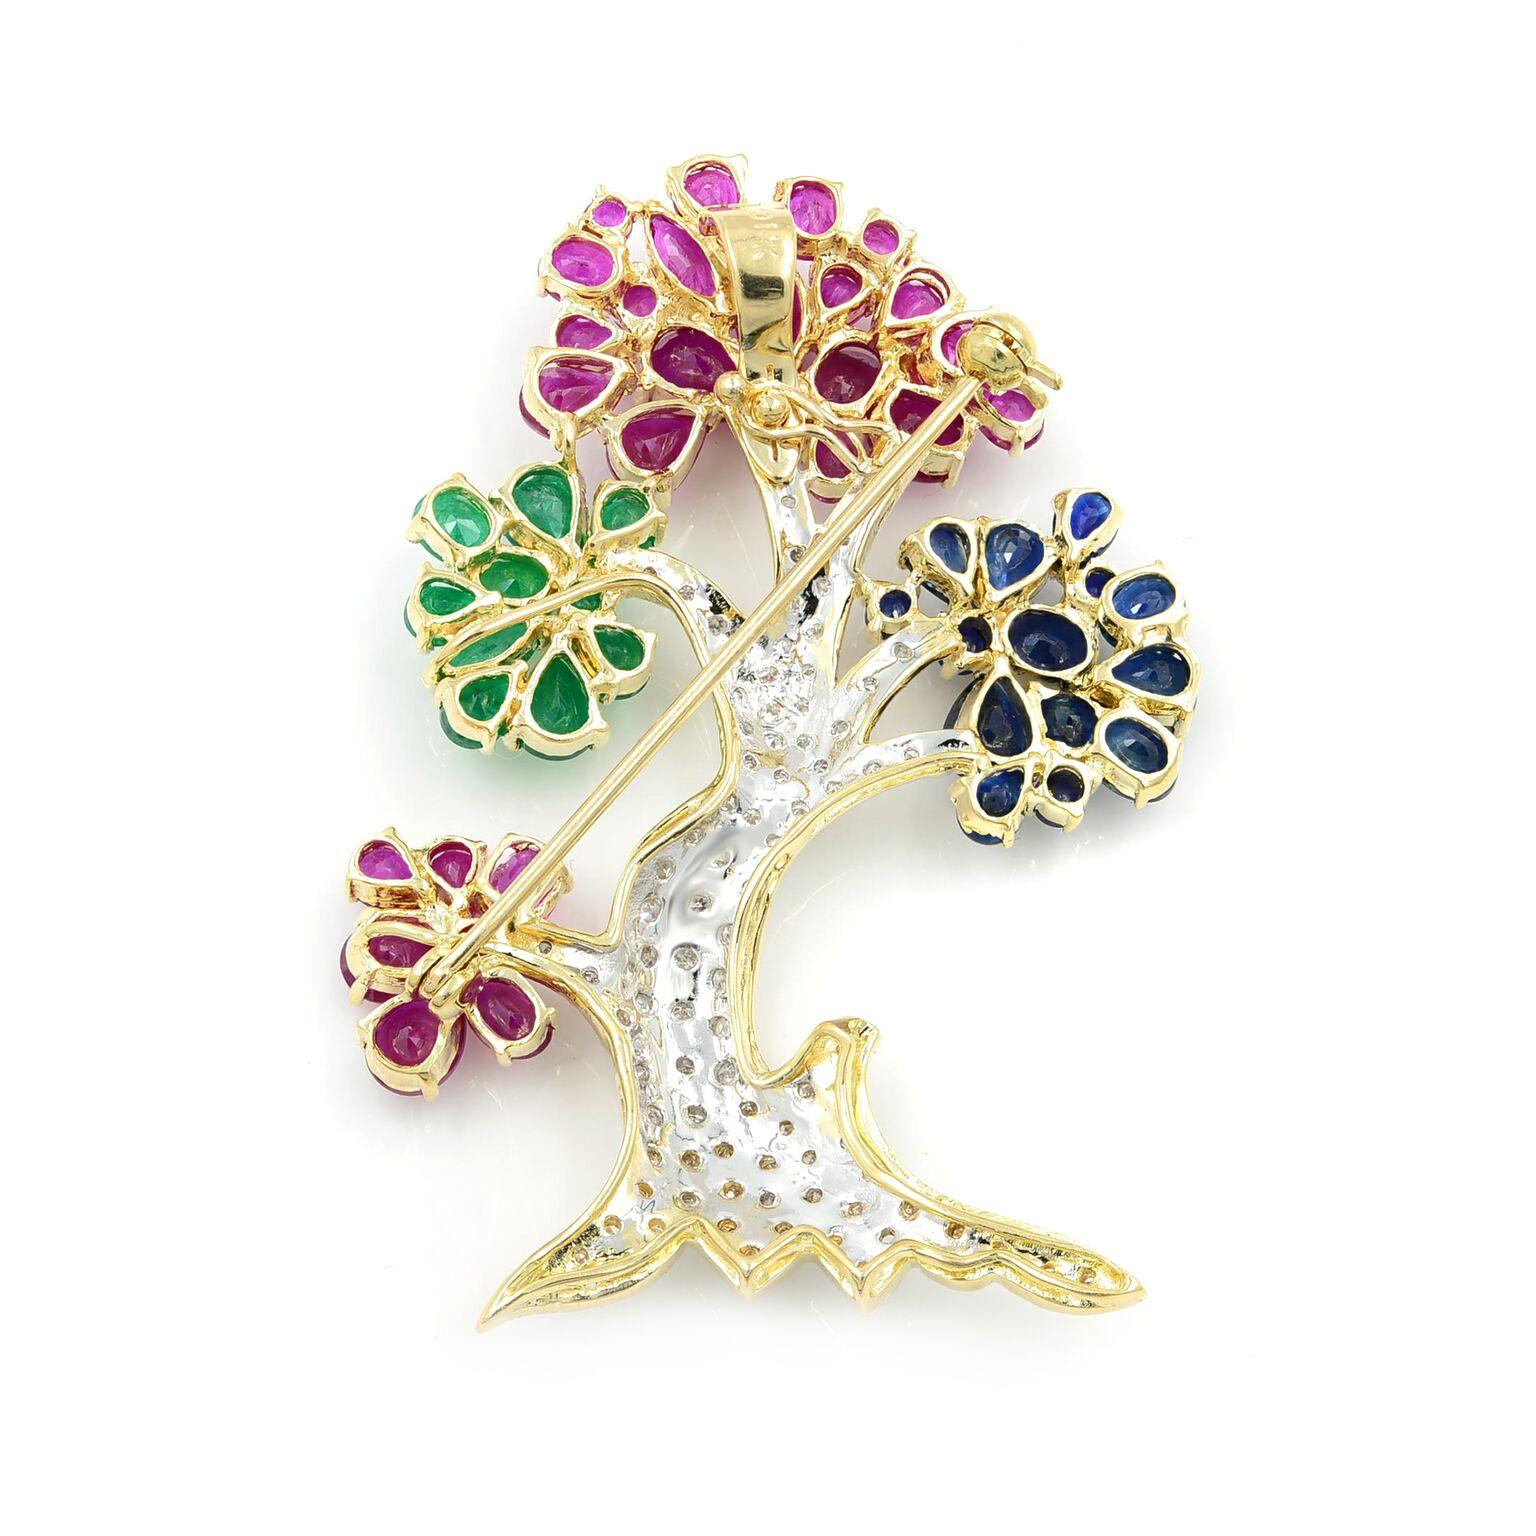 The colorful tree in this brooch, of 14 karat yellow gold, consists of vibrant ruby, emerald and sapphire petaled flowers which are accented by brilliant-cut diamonds. This style of brooch has truly endearing qualities. The jewels are described as